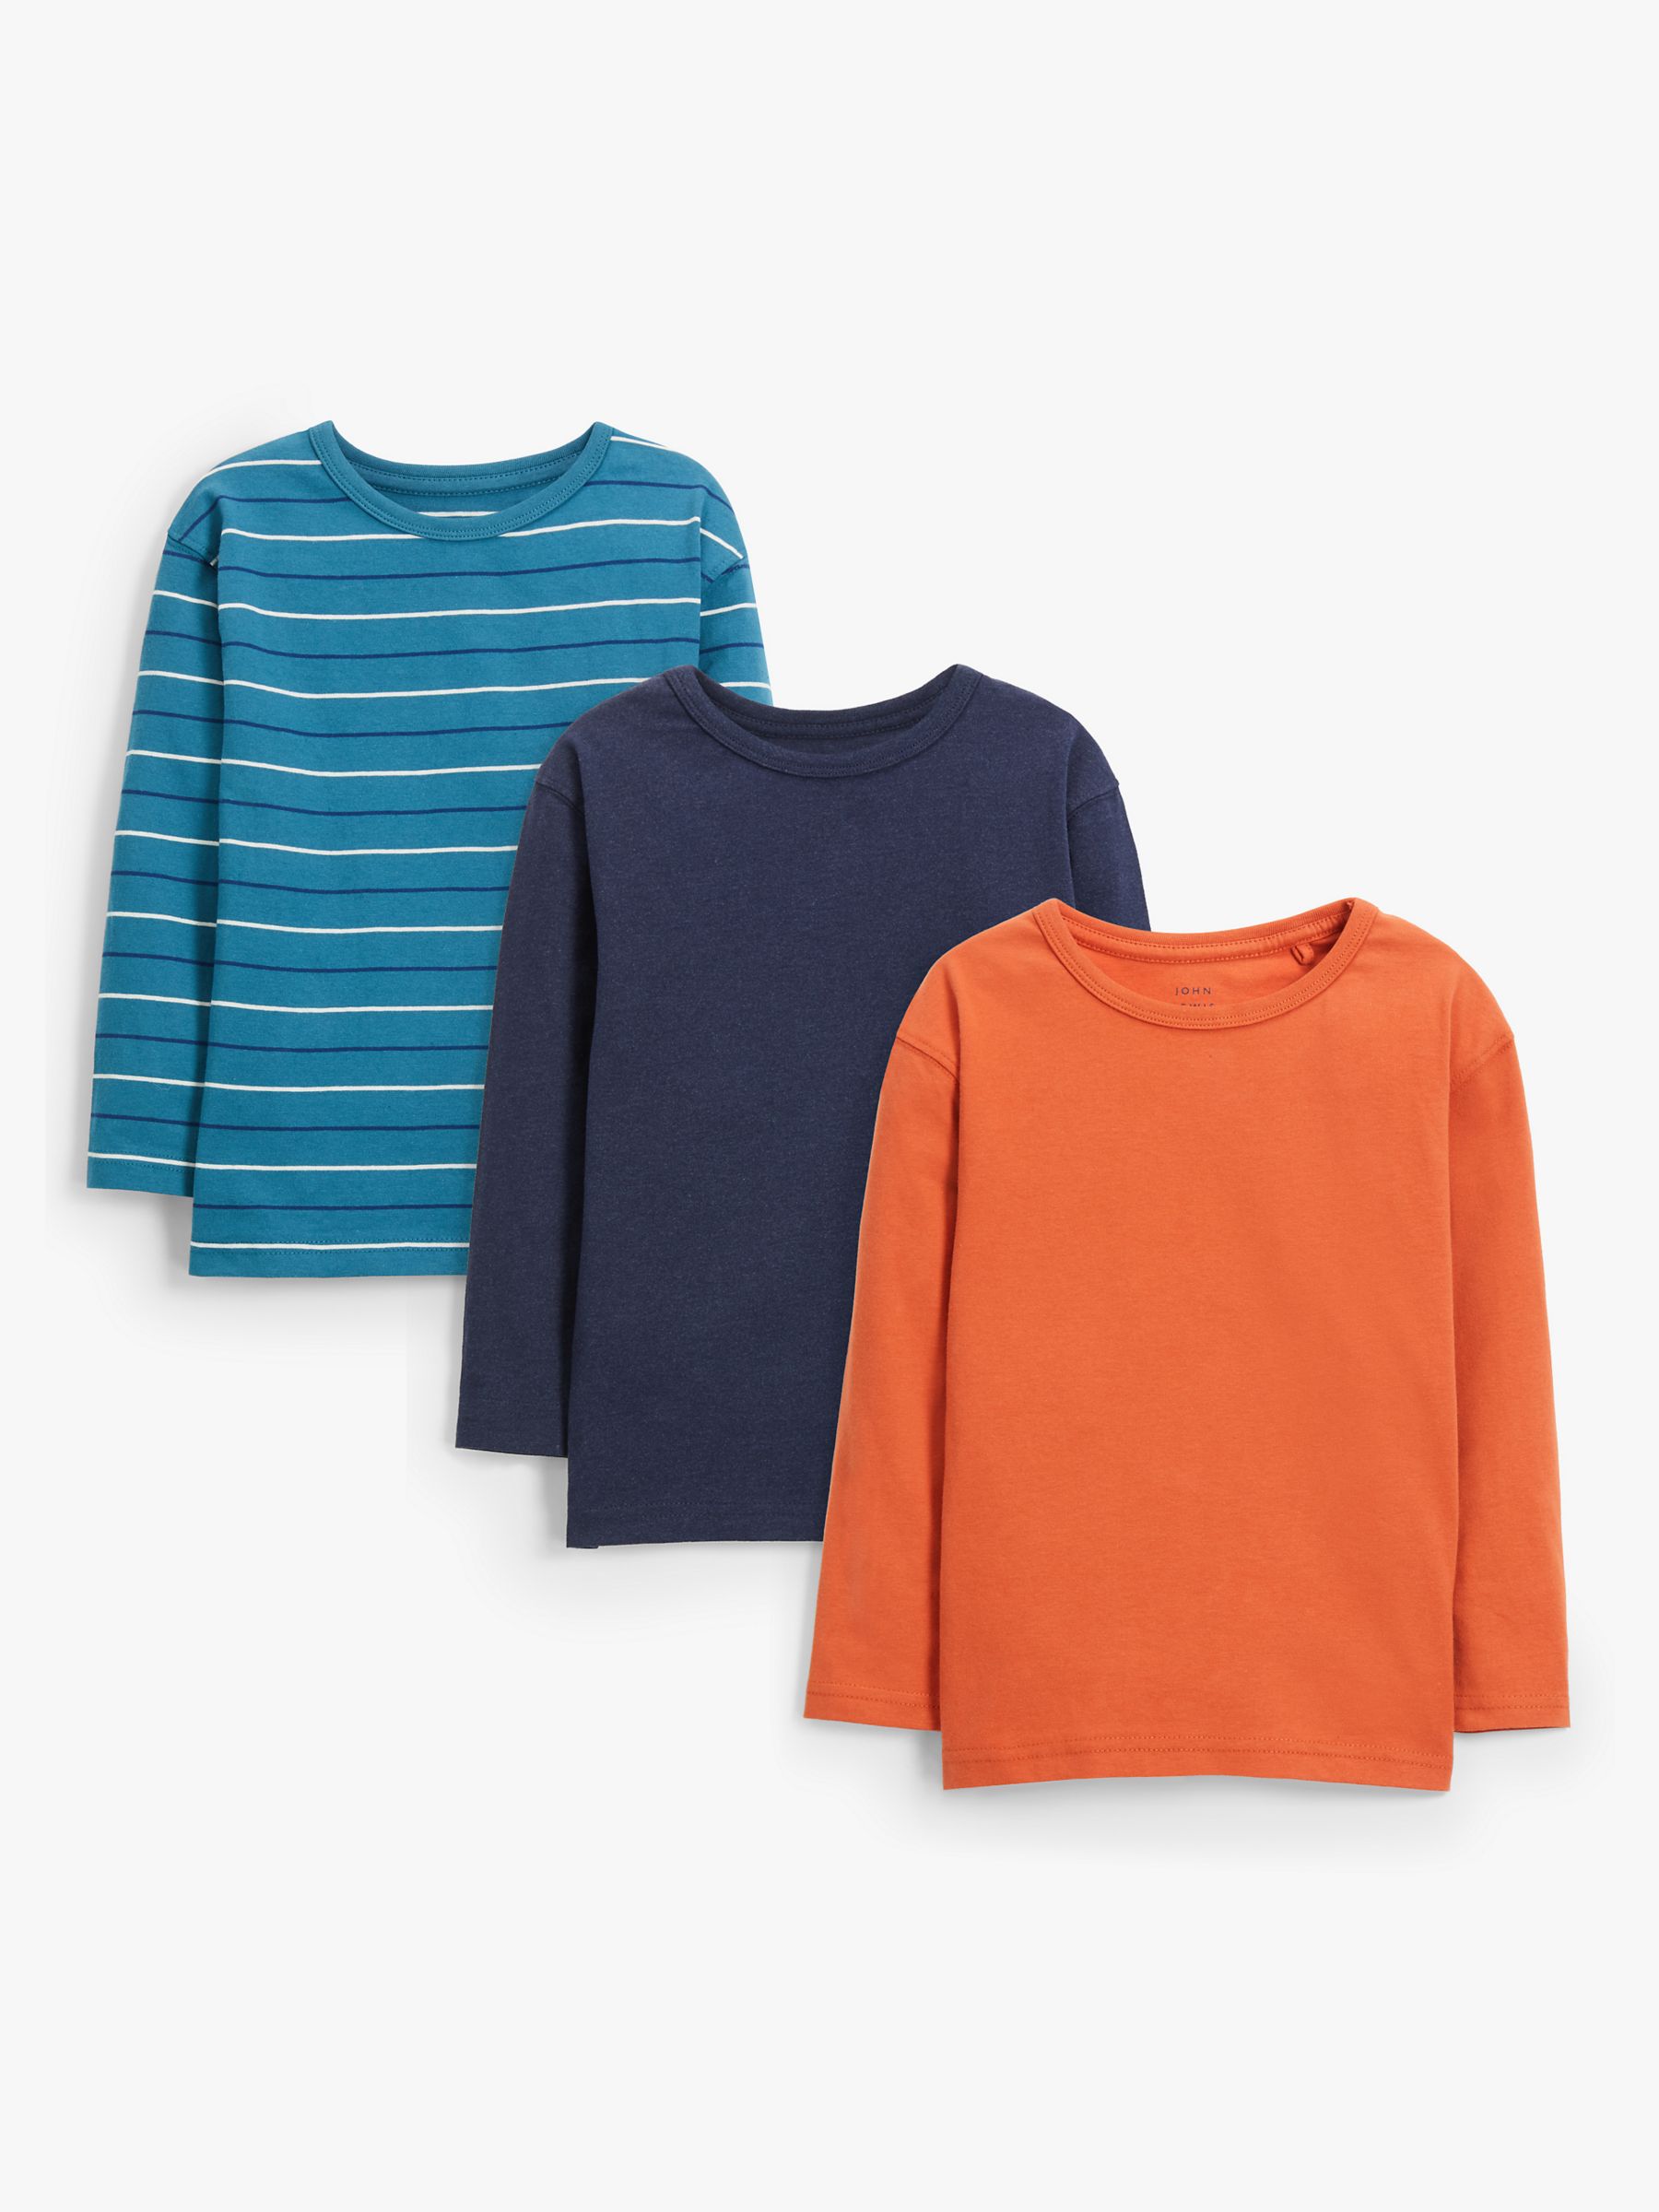 Image of John Lewis and Partners Boys Mix Long Sleeve Tops Pack of 3 Multi